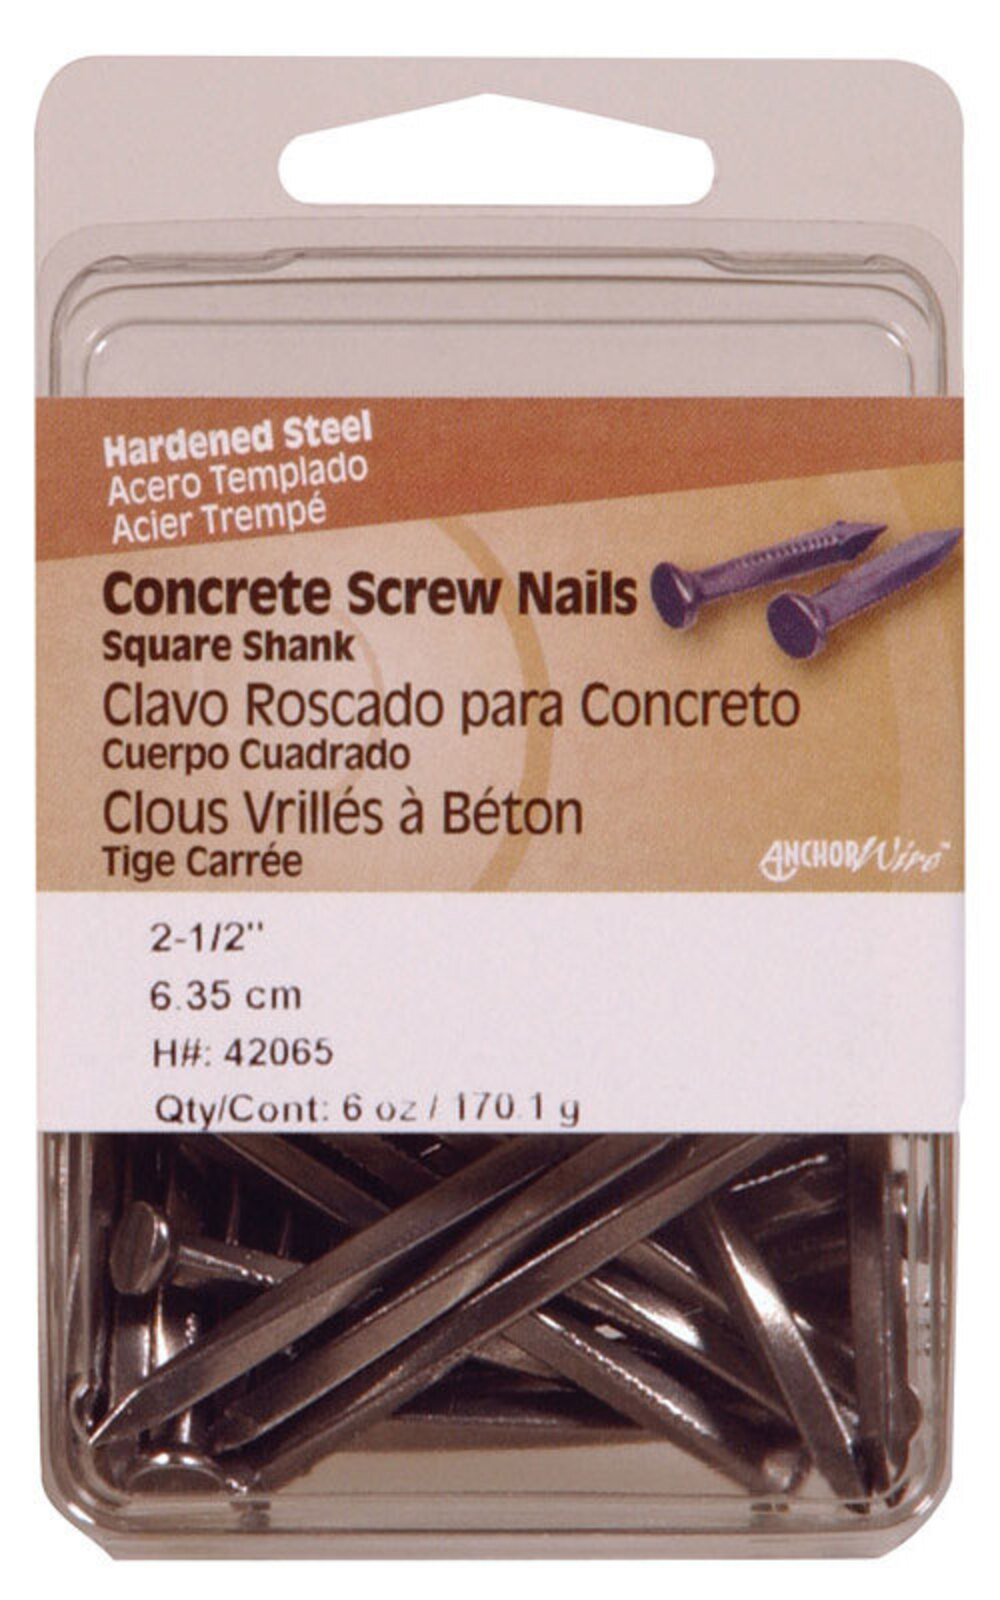 Hillman Concrete Screw Nails 2-1/2 " Square Steel Clamshell Pack of 5 - image 2 of 2